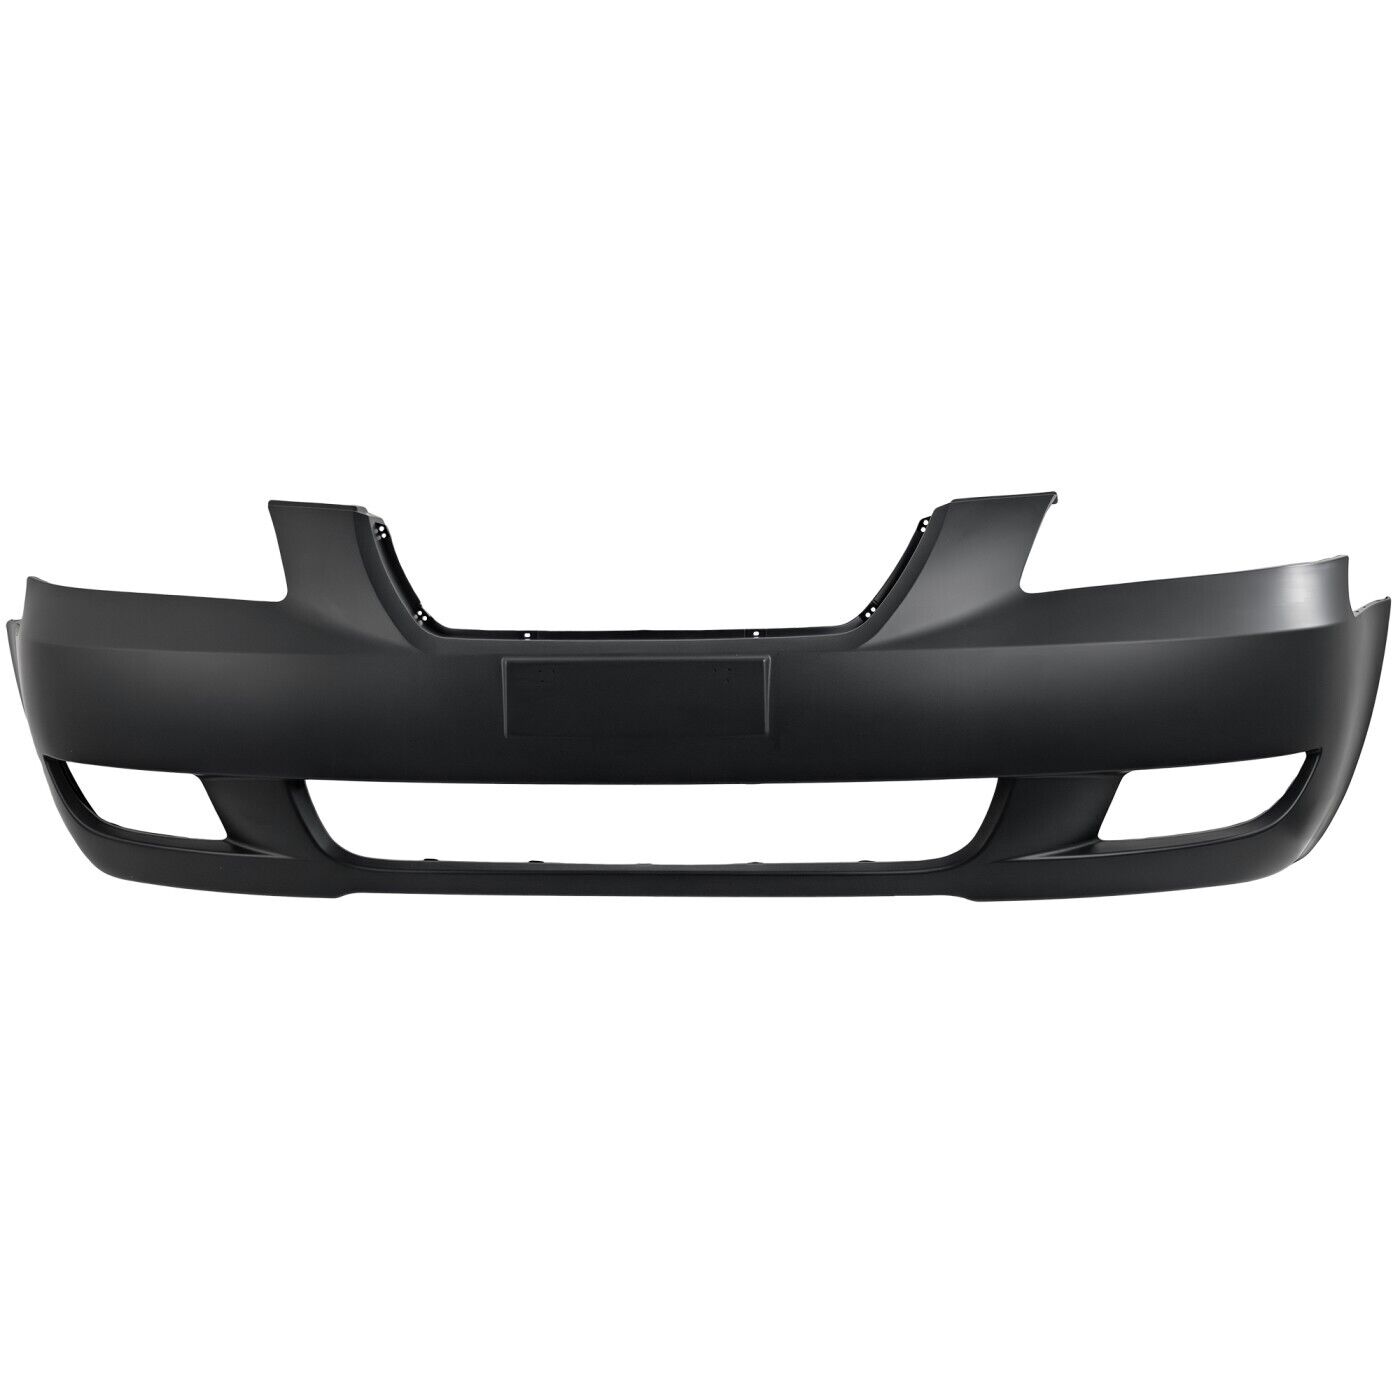 Front Bumper Cover For 2006-2008 Hyundai Sonata with Fog Lamp Holes 865113K000